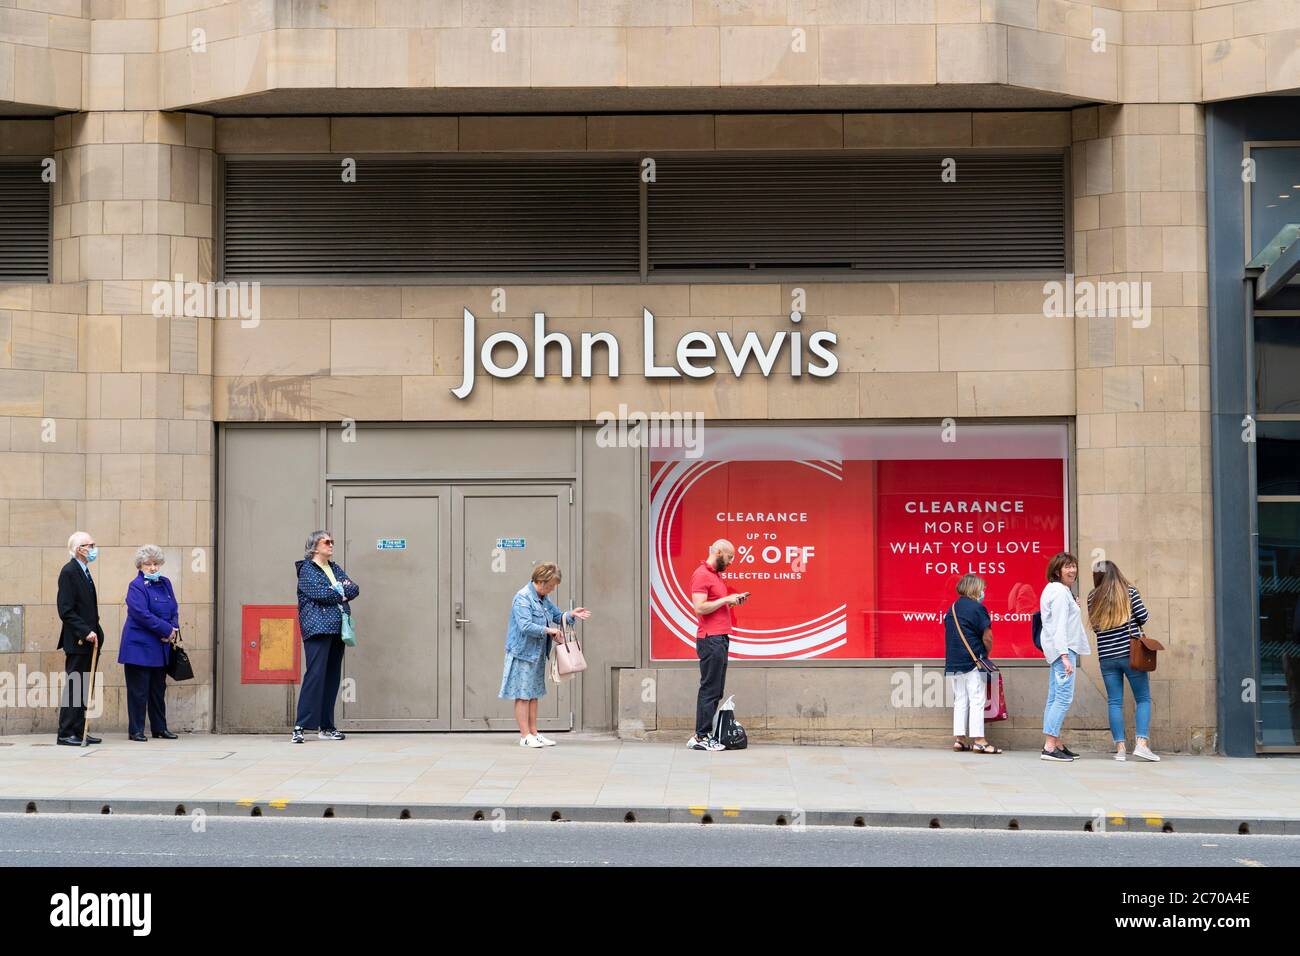 Edinburgh, Scotland, UK. 13 July, 2020, Monday in Scotland saw re-opening of shopping centres after further relaxation of coronavirus lockdown on business. John Lewis & Partners department store opened early at 9.30 am after a long queue had formed outside. Iain Masterton/Alamy Live News Stock Photo